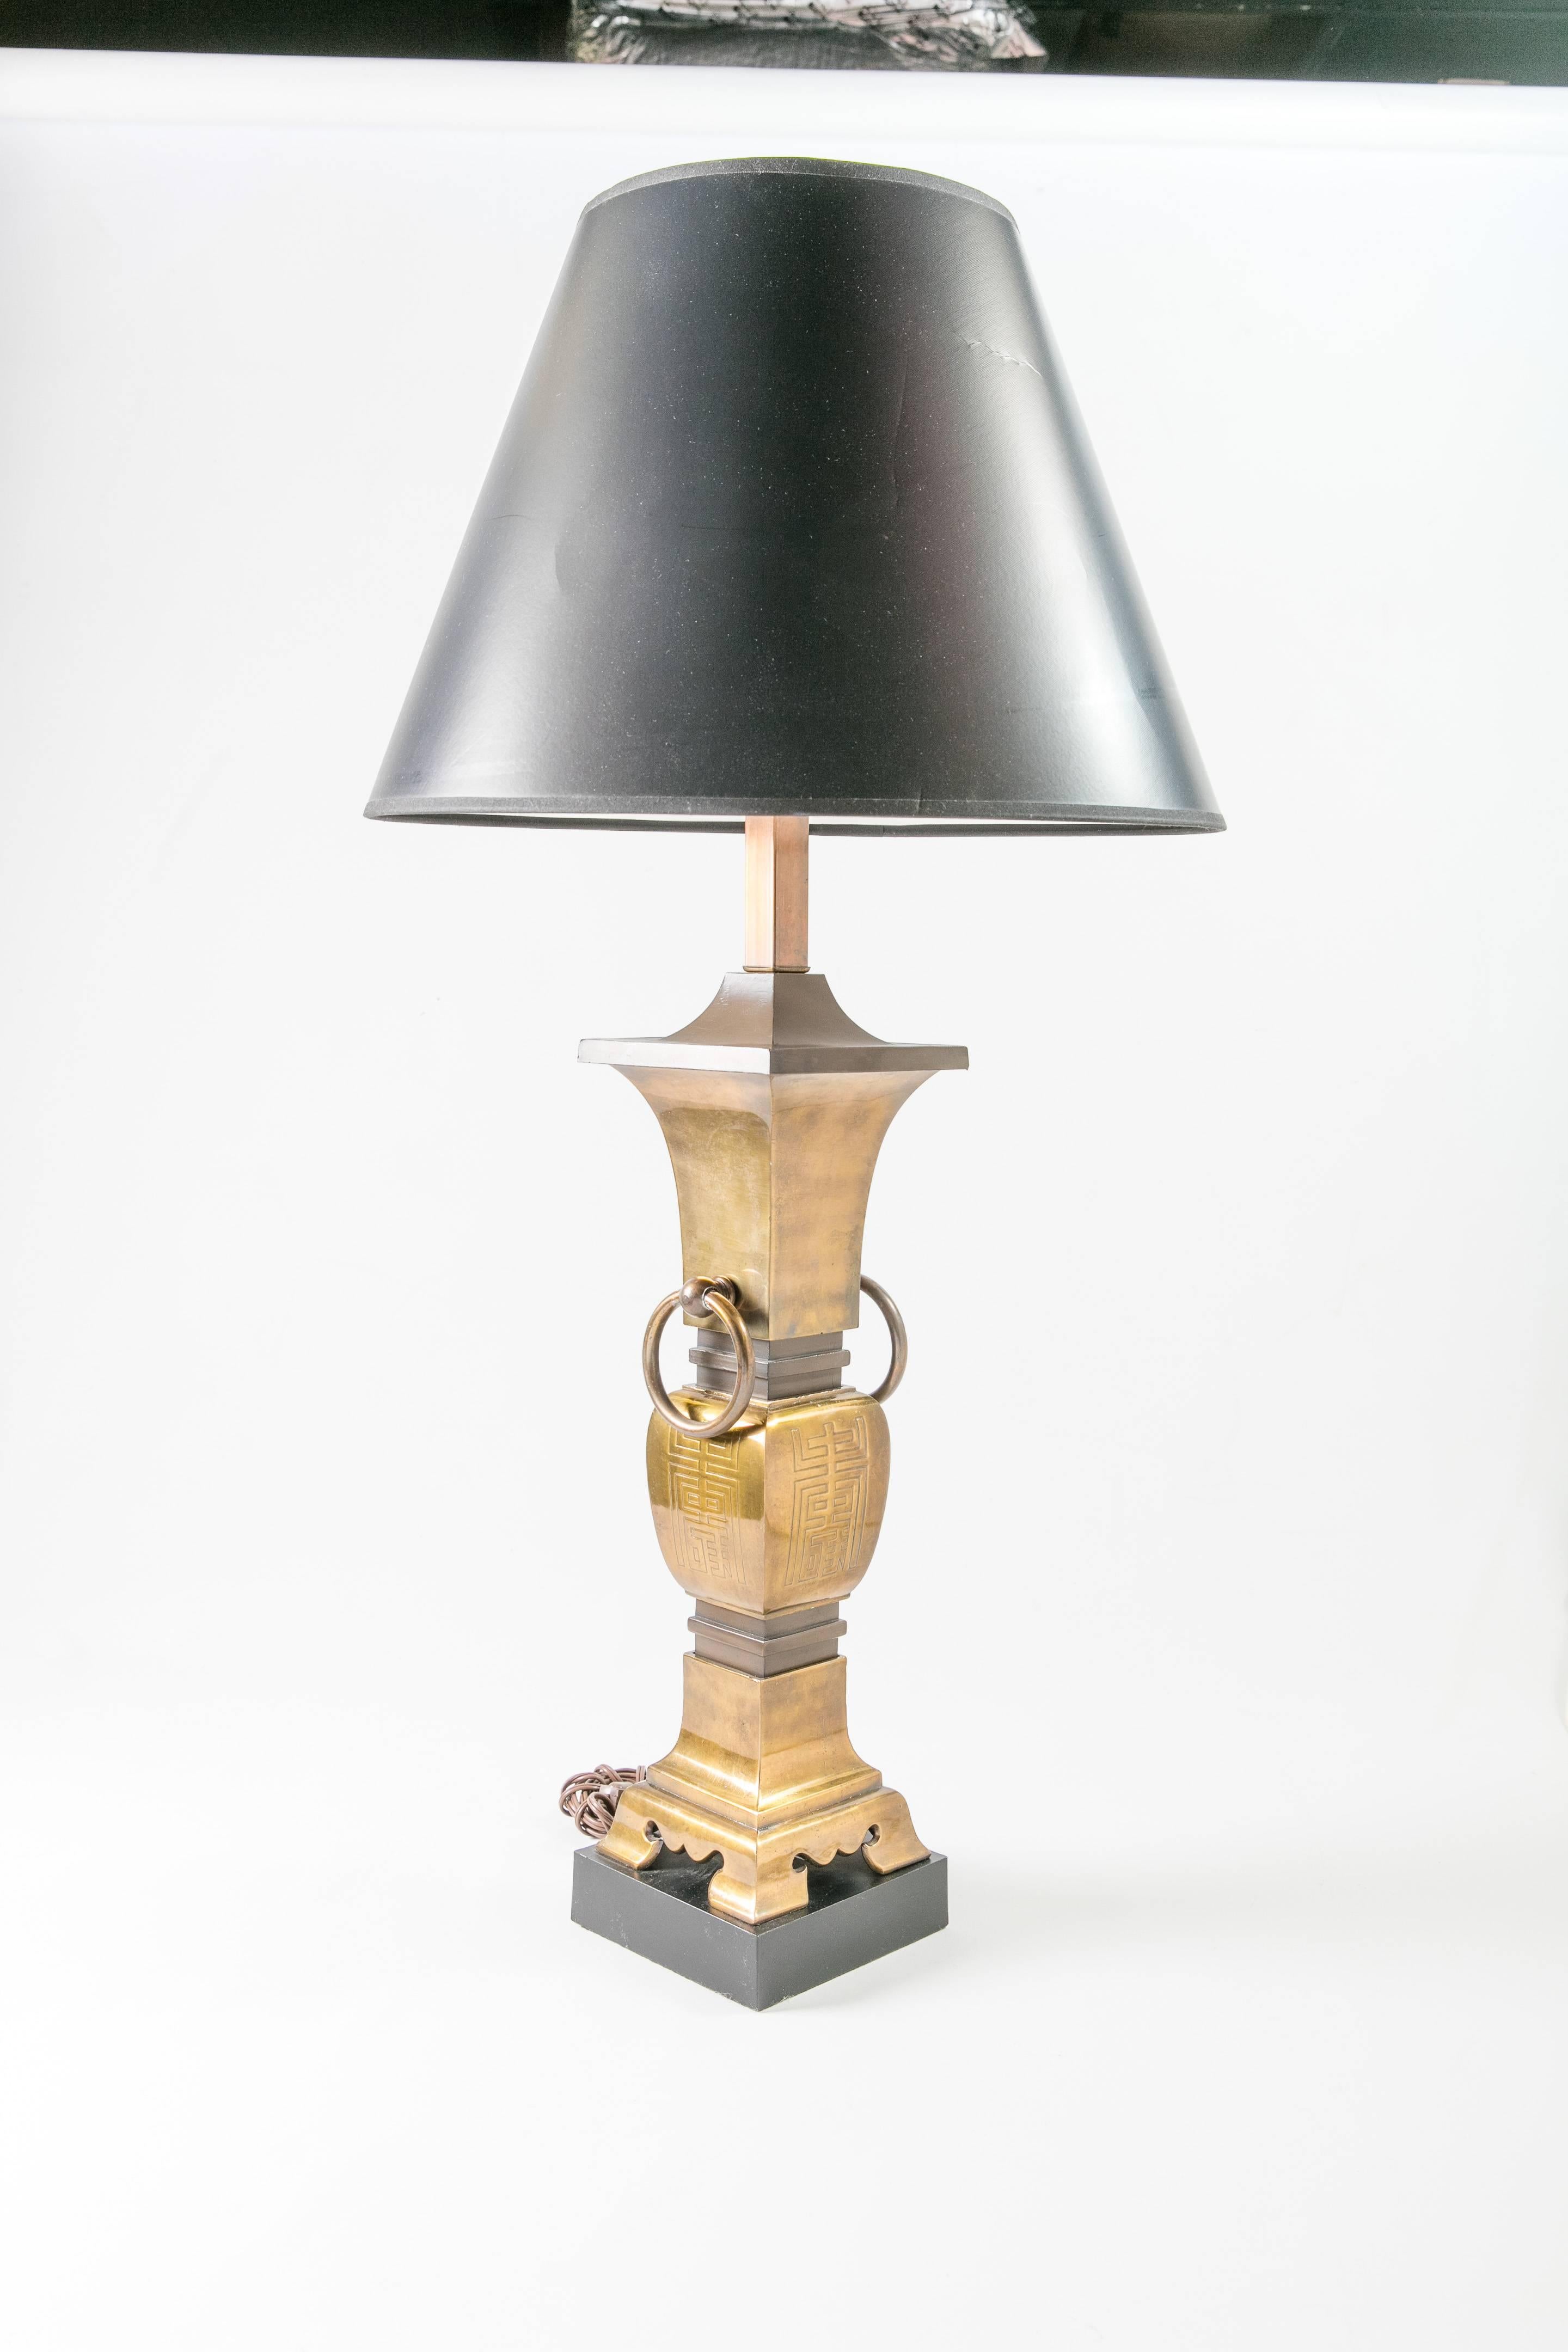 1960s heavy brass lamp with embossed Asian style motifs. Black paper shade. Newly wired and working; 60W-max bulb. Measures: Shade, 9